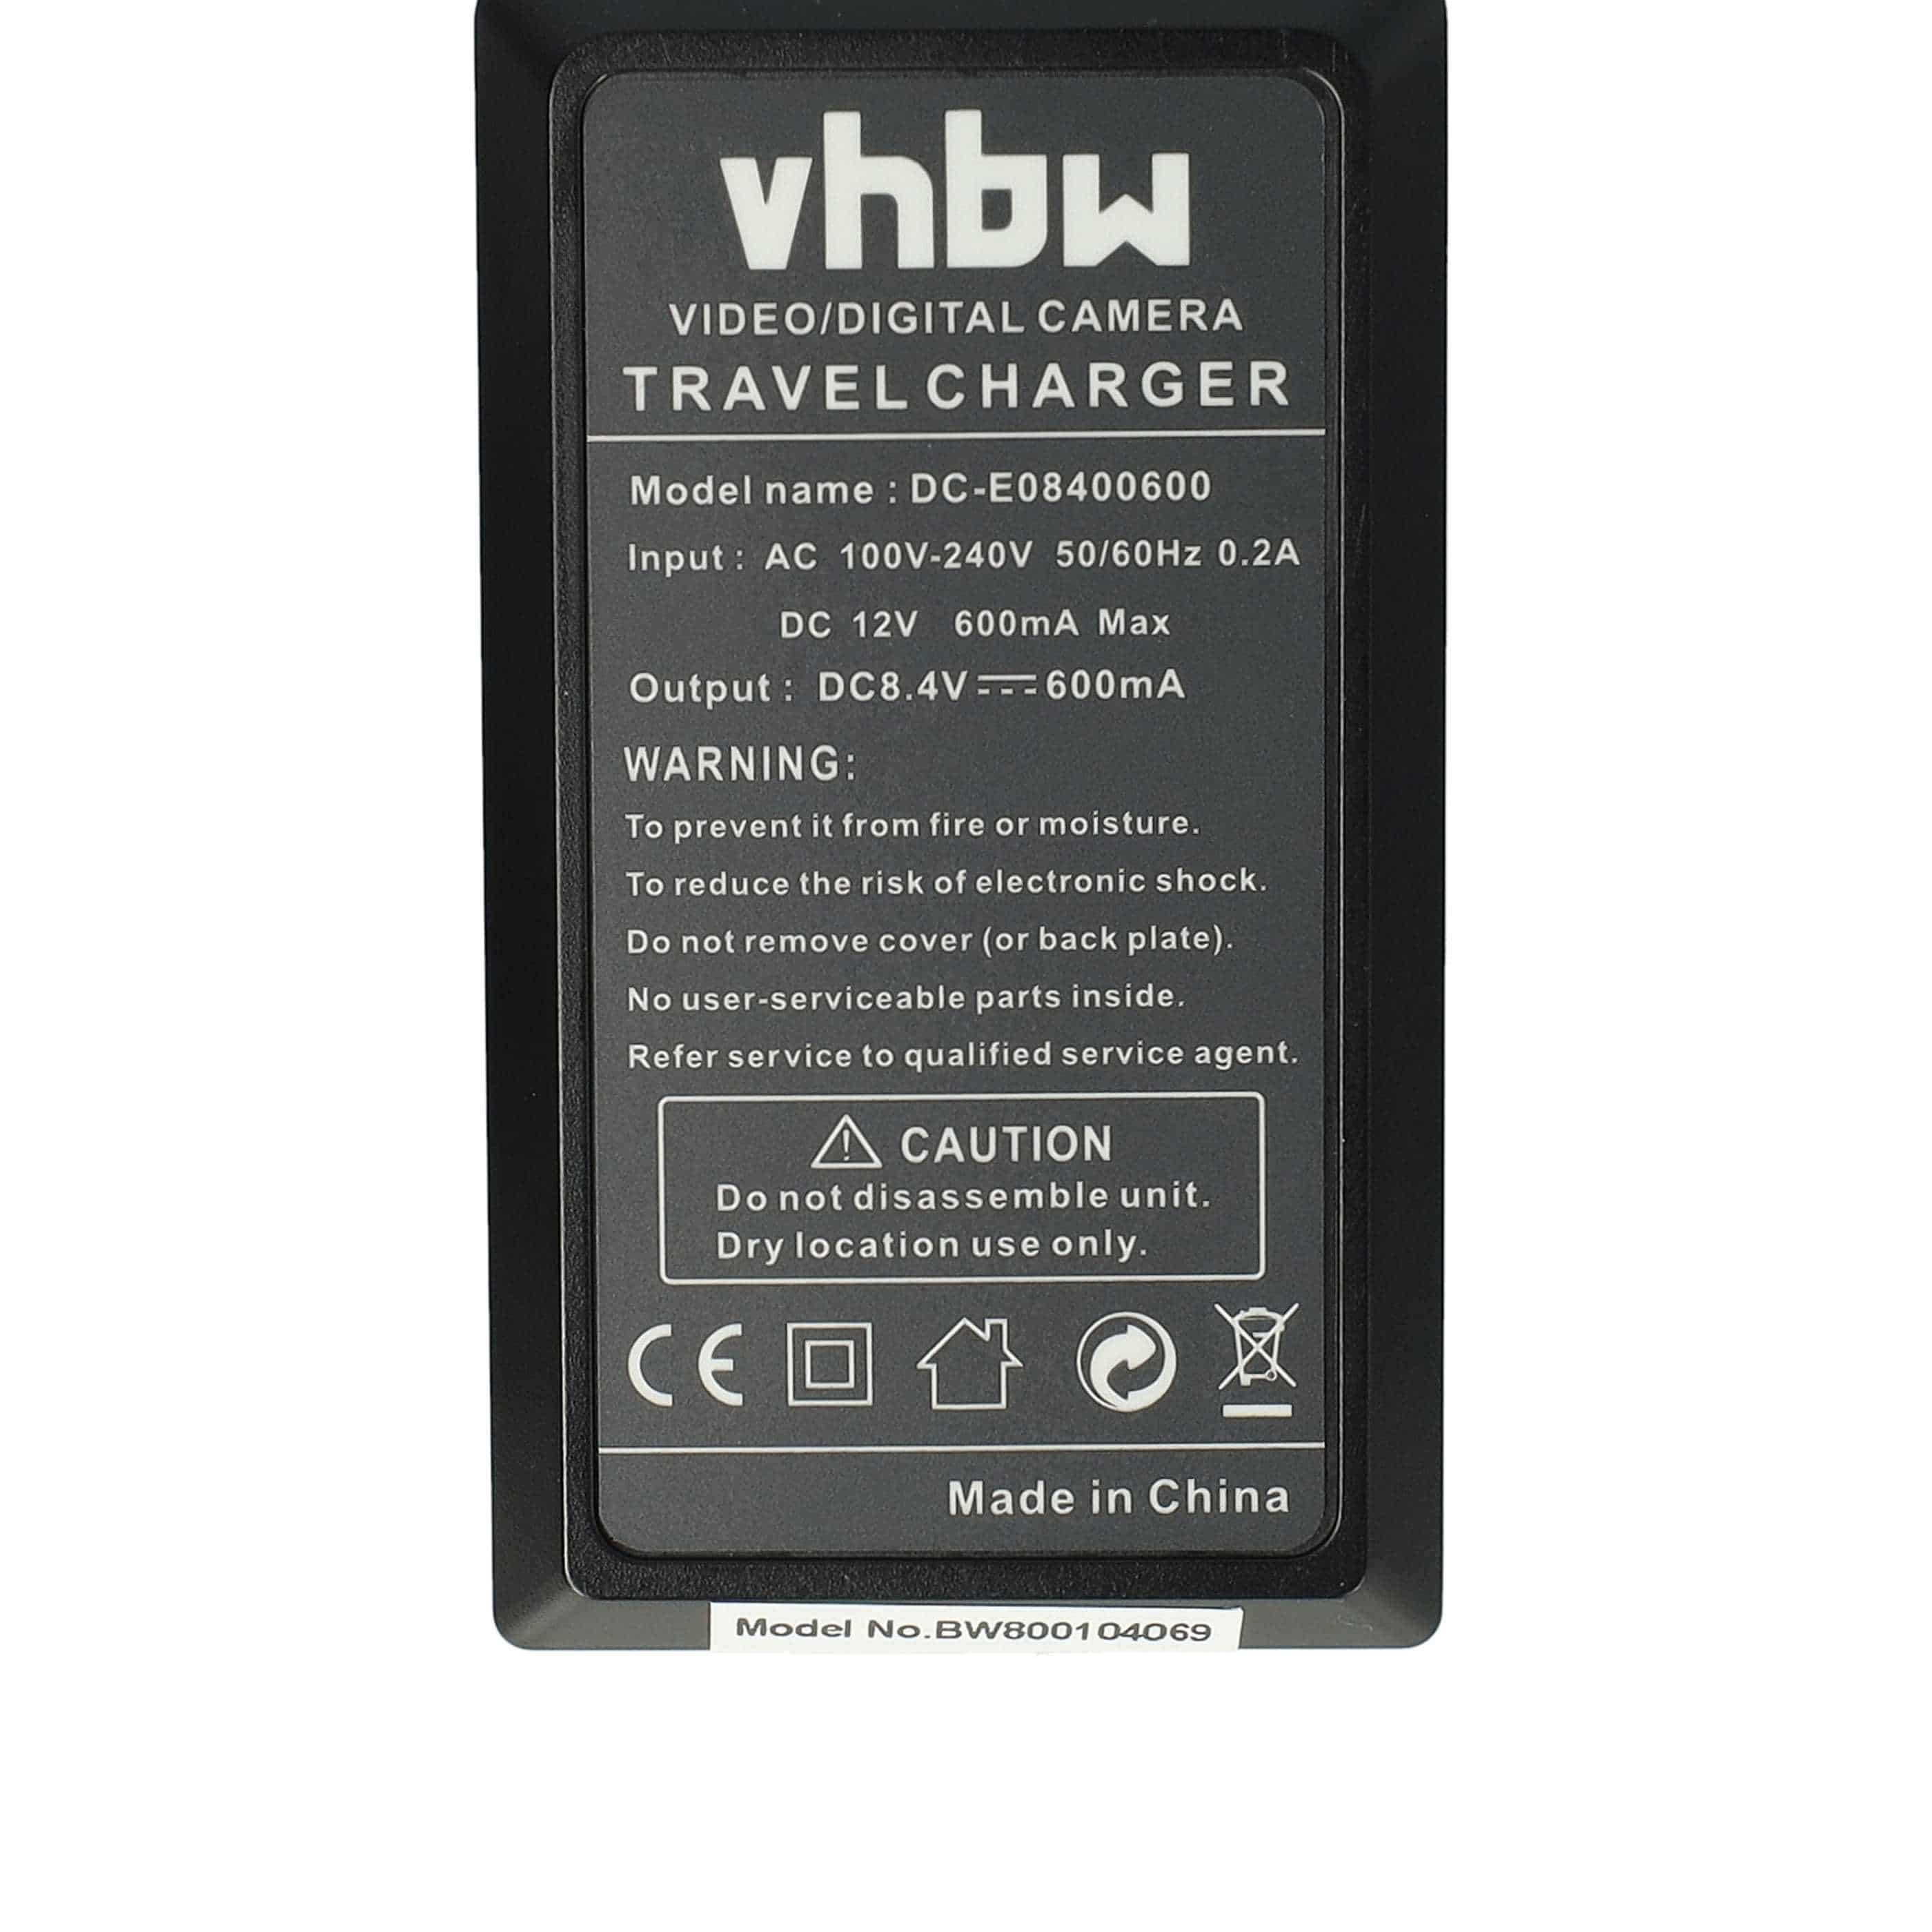 Battery Charger suitable for Lumix DC-GH5 Camera etc. - 0.6 A, 8.4 V